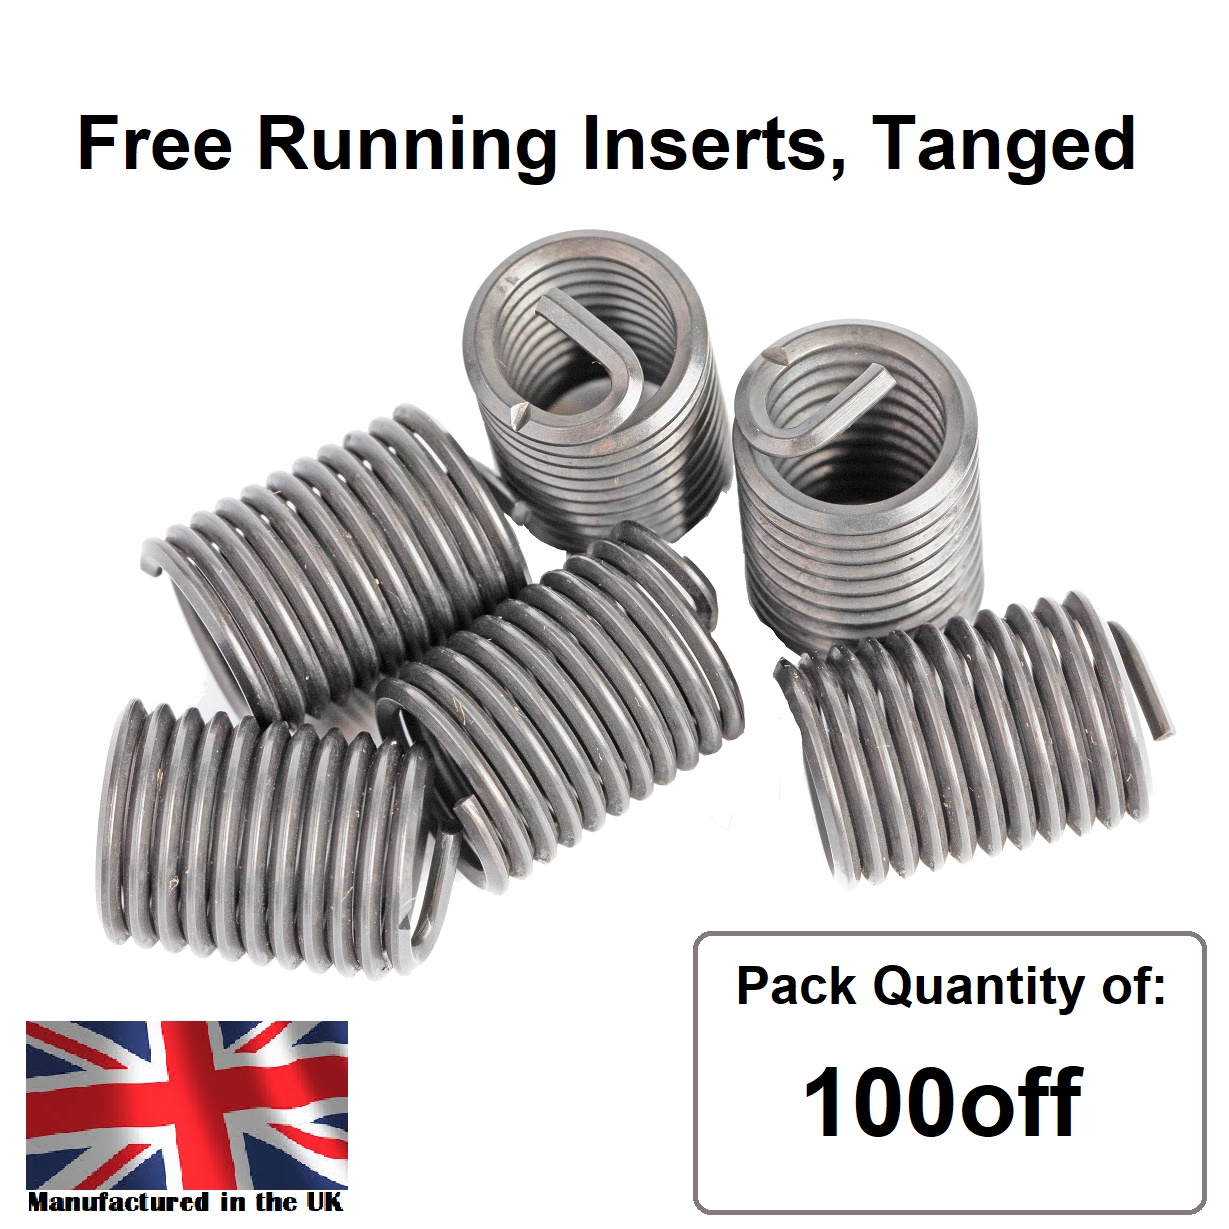 10-24 x 2D UNC, Free Running, Tanged, Wire Thread Repair Insert, 304/A2 Stainless (Pack 100)